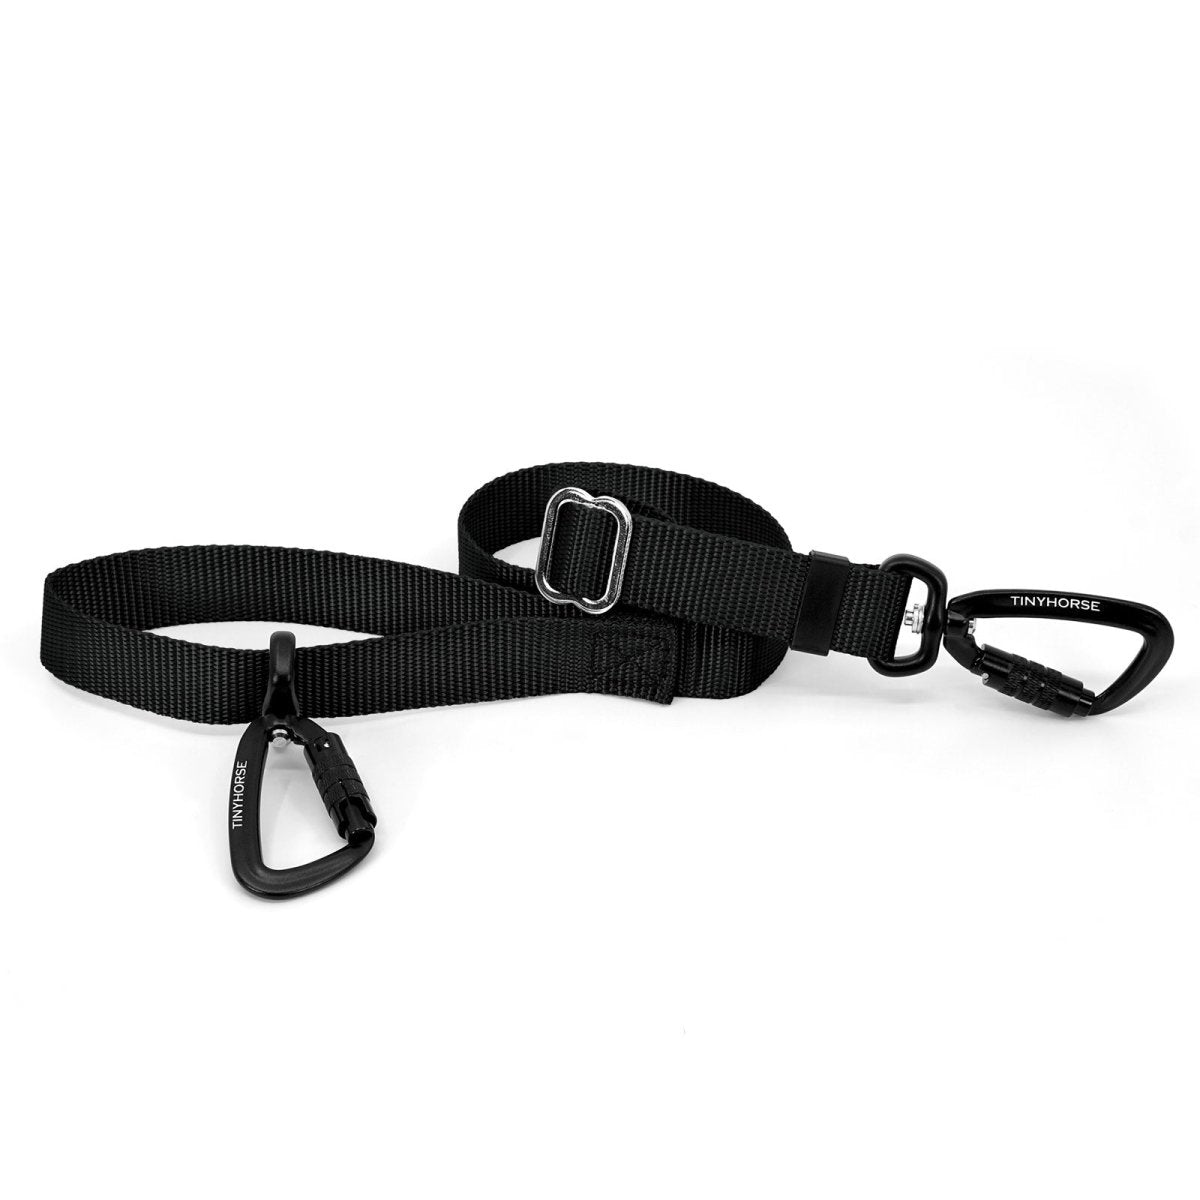 A black-coloured Lead-All Lite with an adjustable nylon webbing leash and 2 auto-locking carabiners